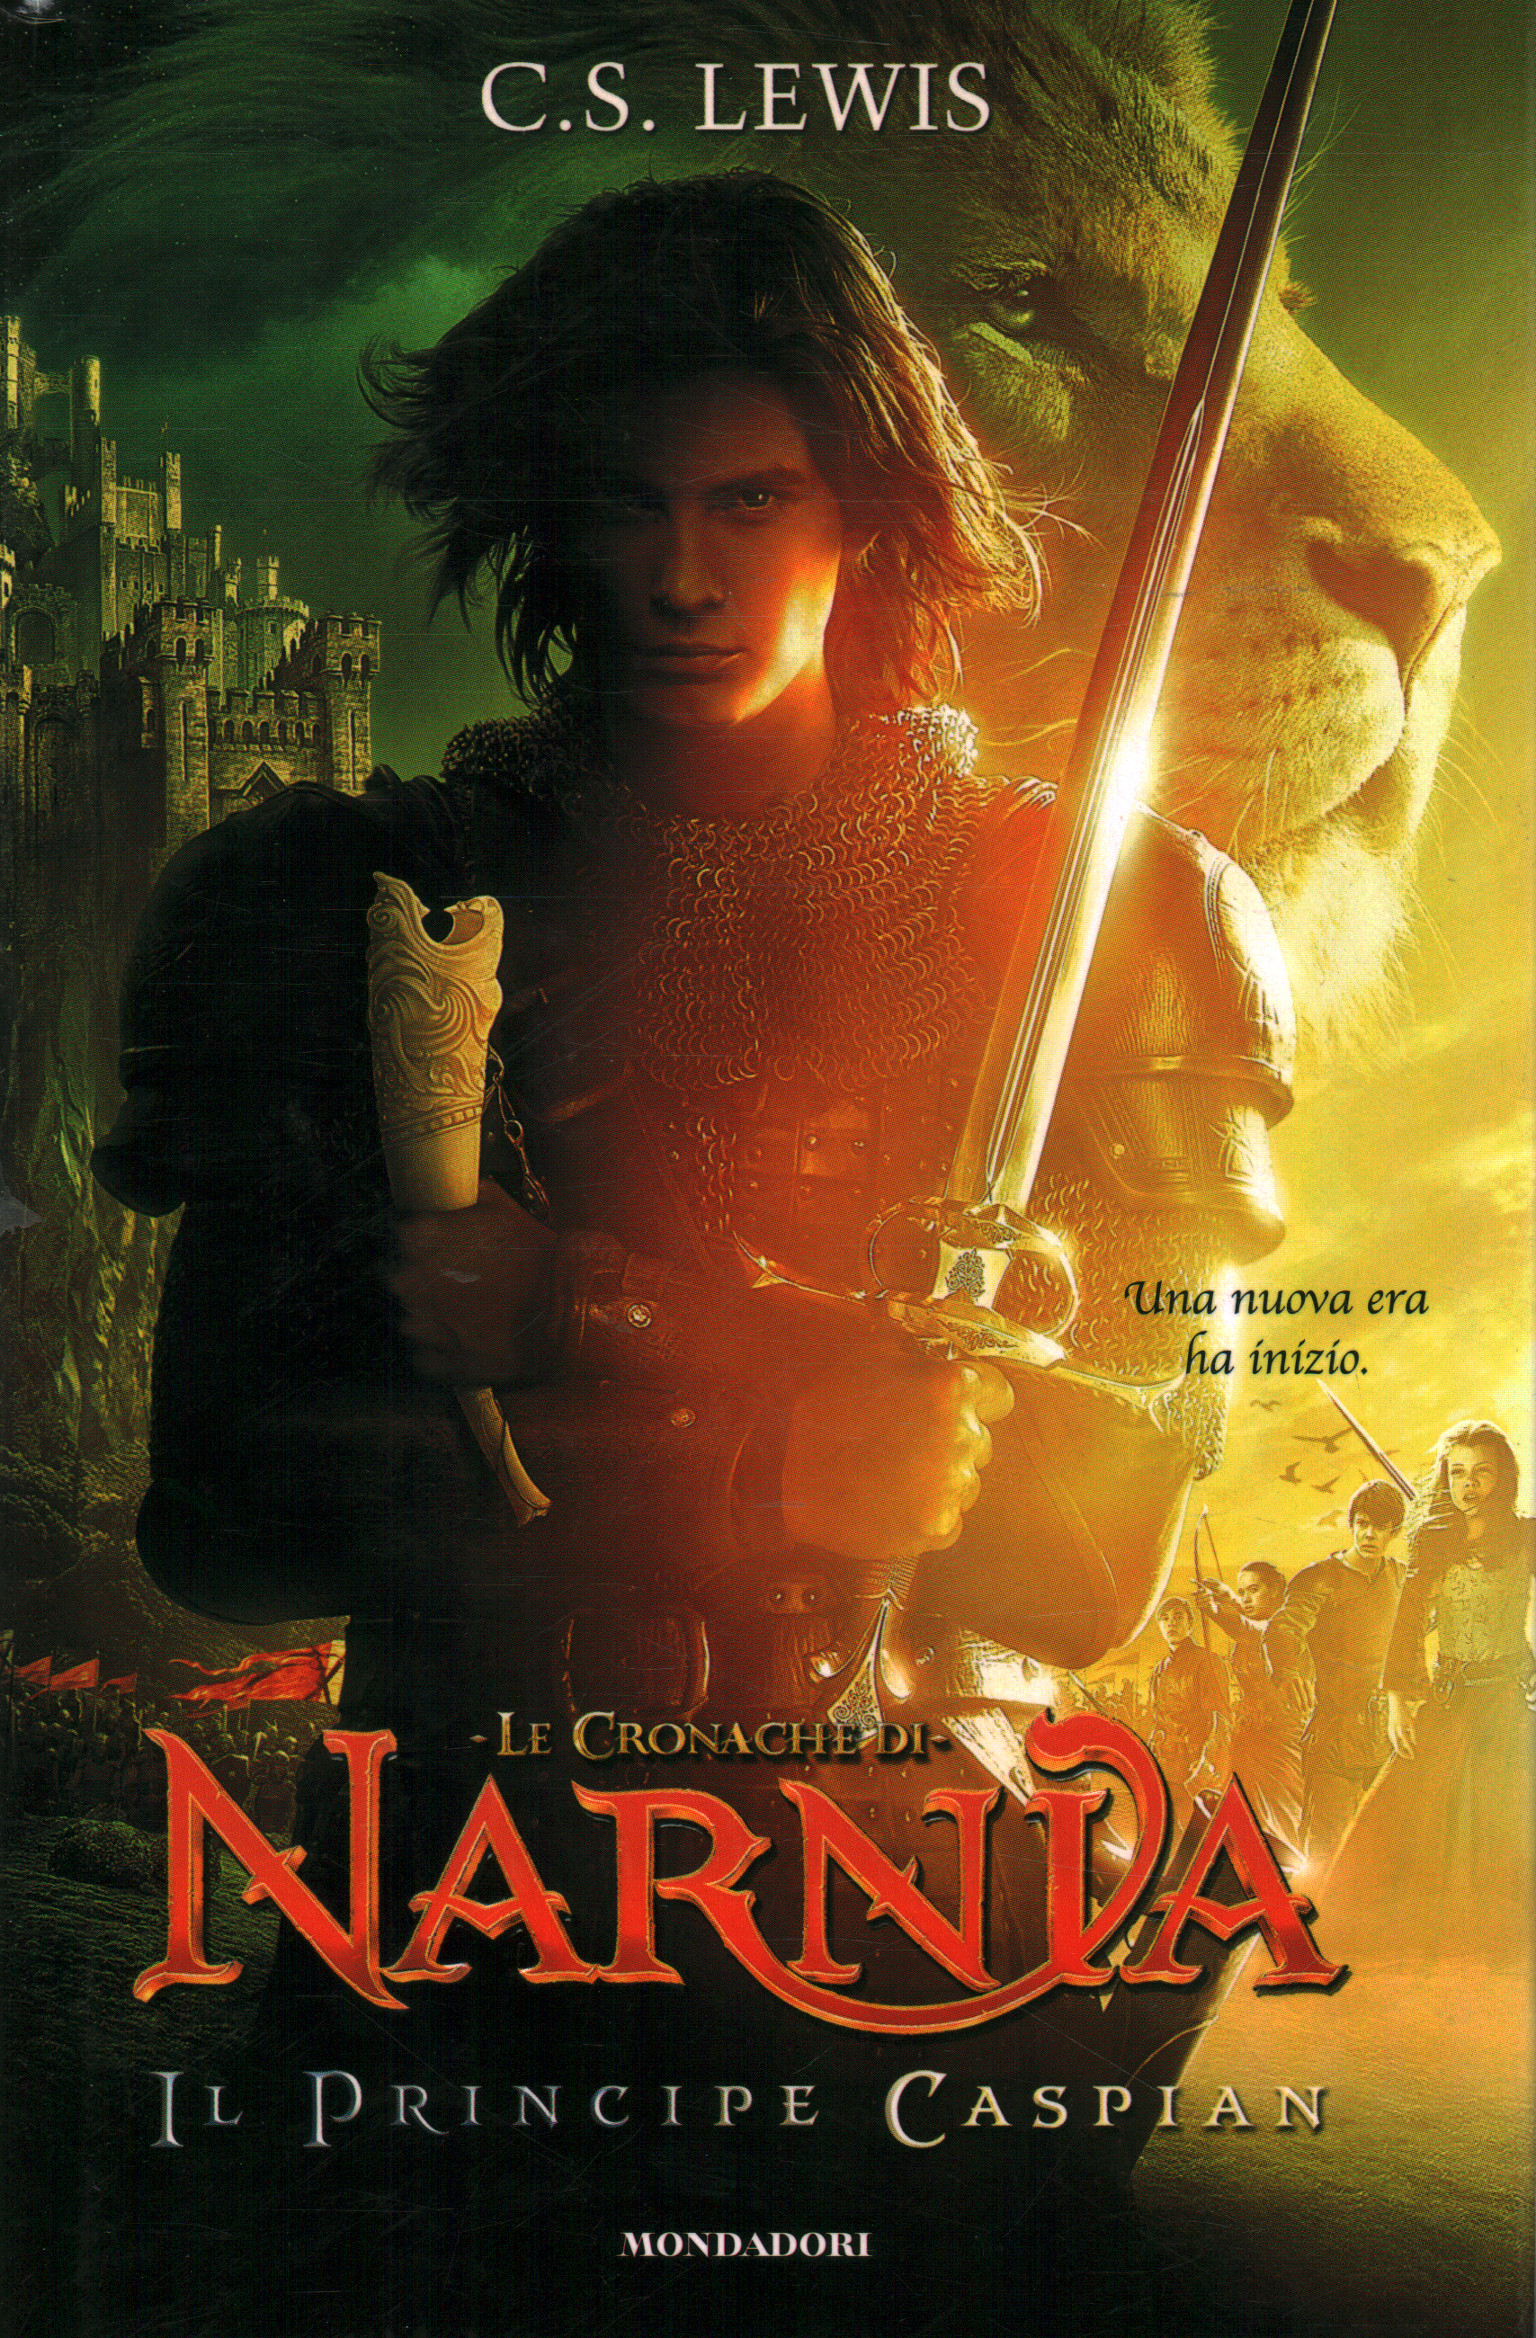 The Chronicles of Narnia - Prince Caspian, C.S. Lewis